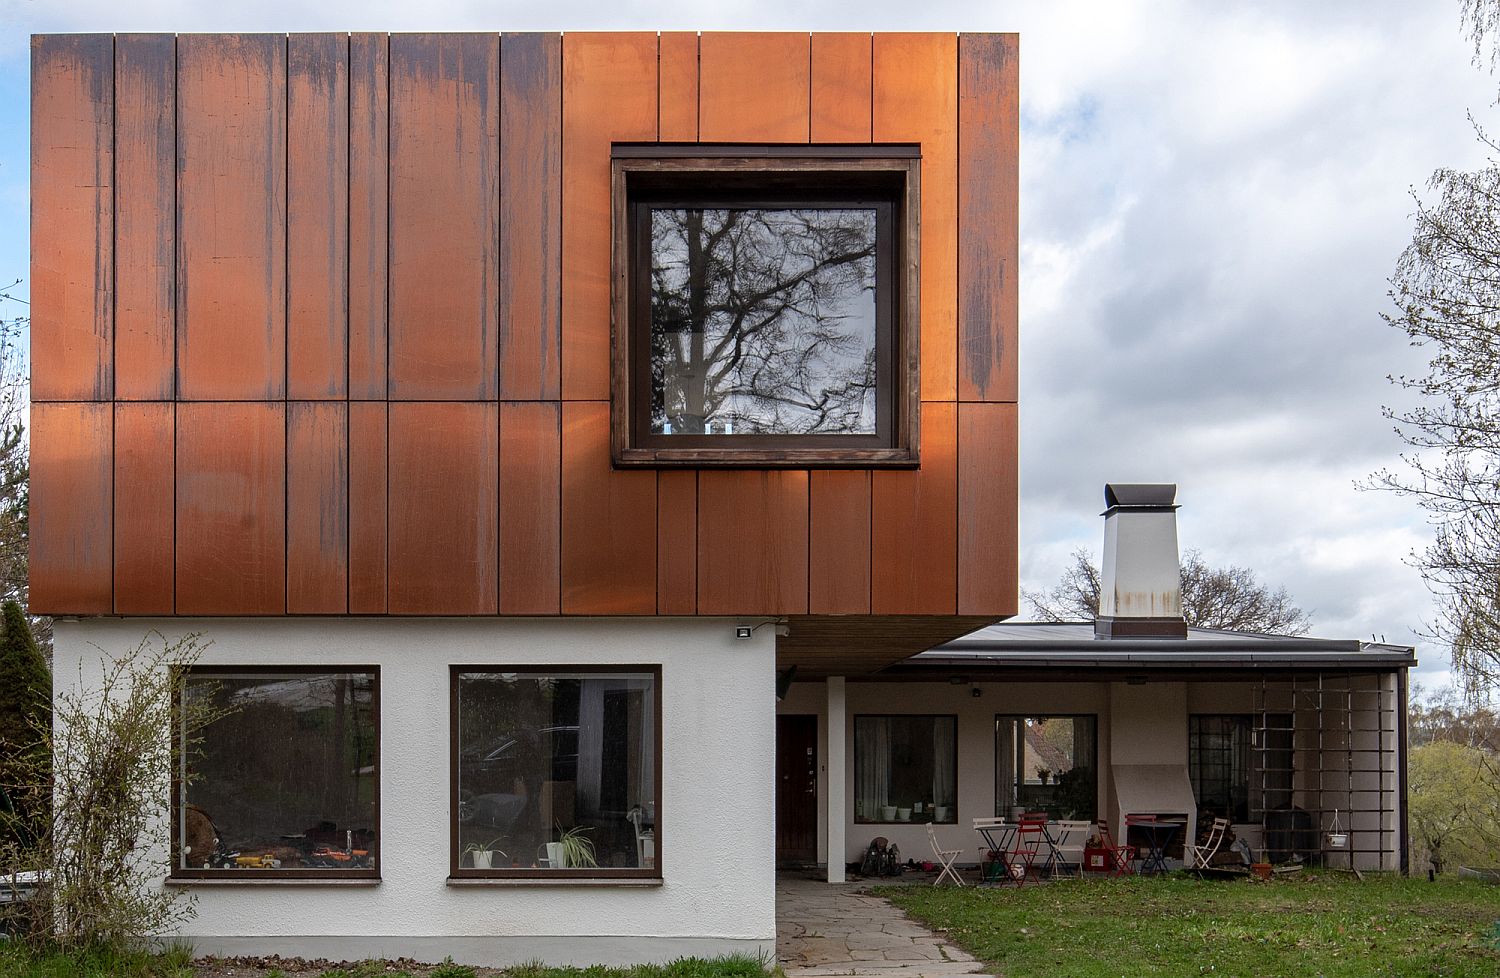 Cyclops House: Copper, Concrete and Windows that Usher in Ample Natural Light